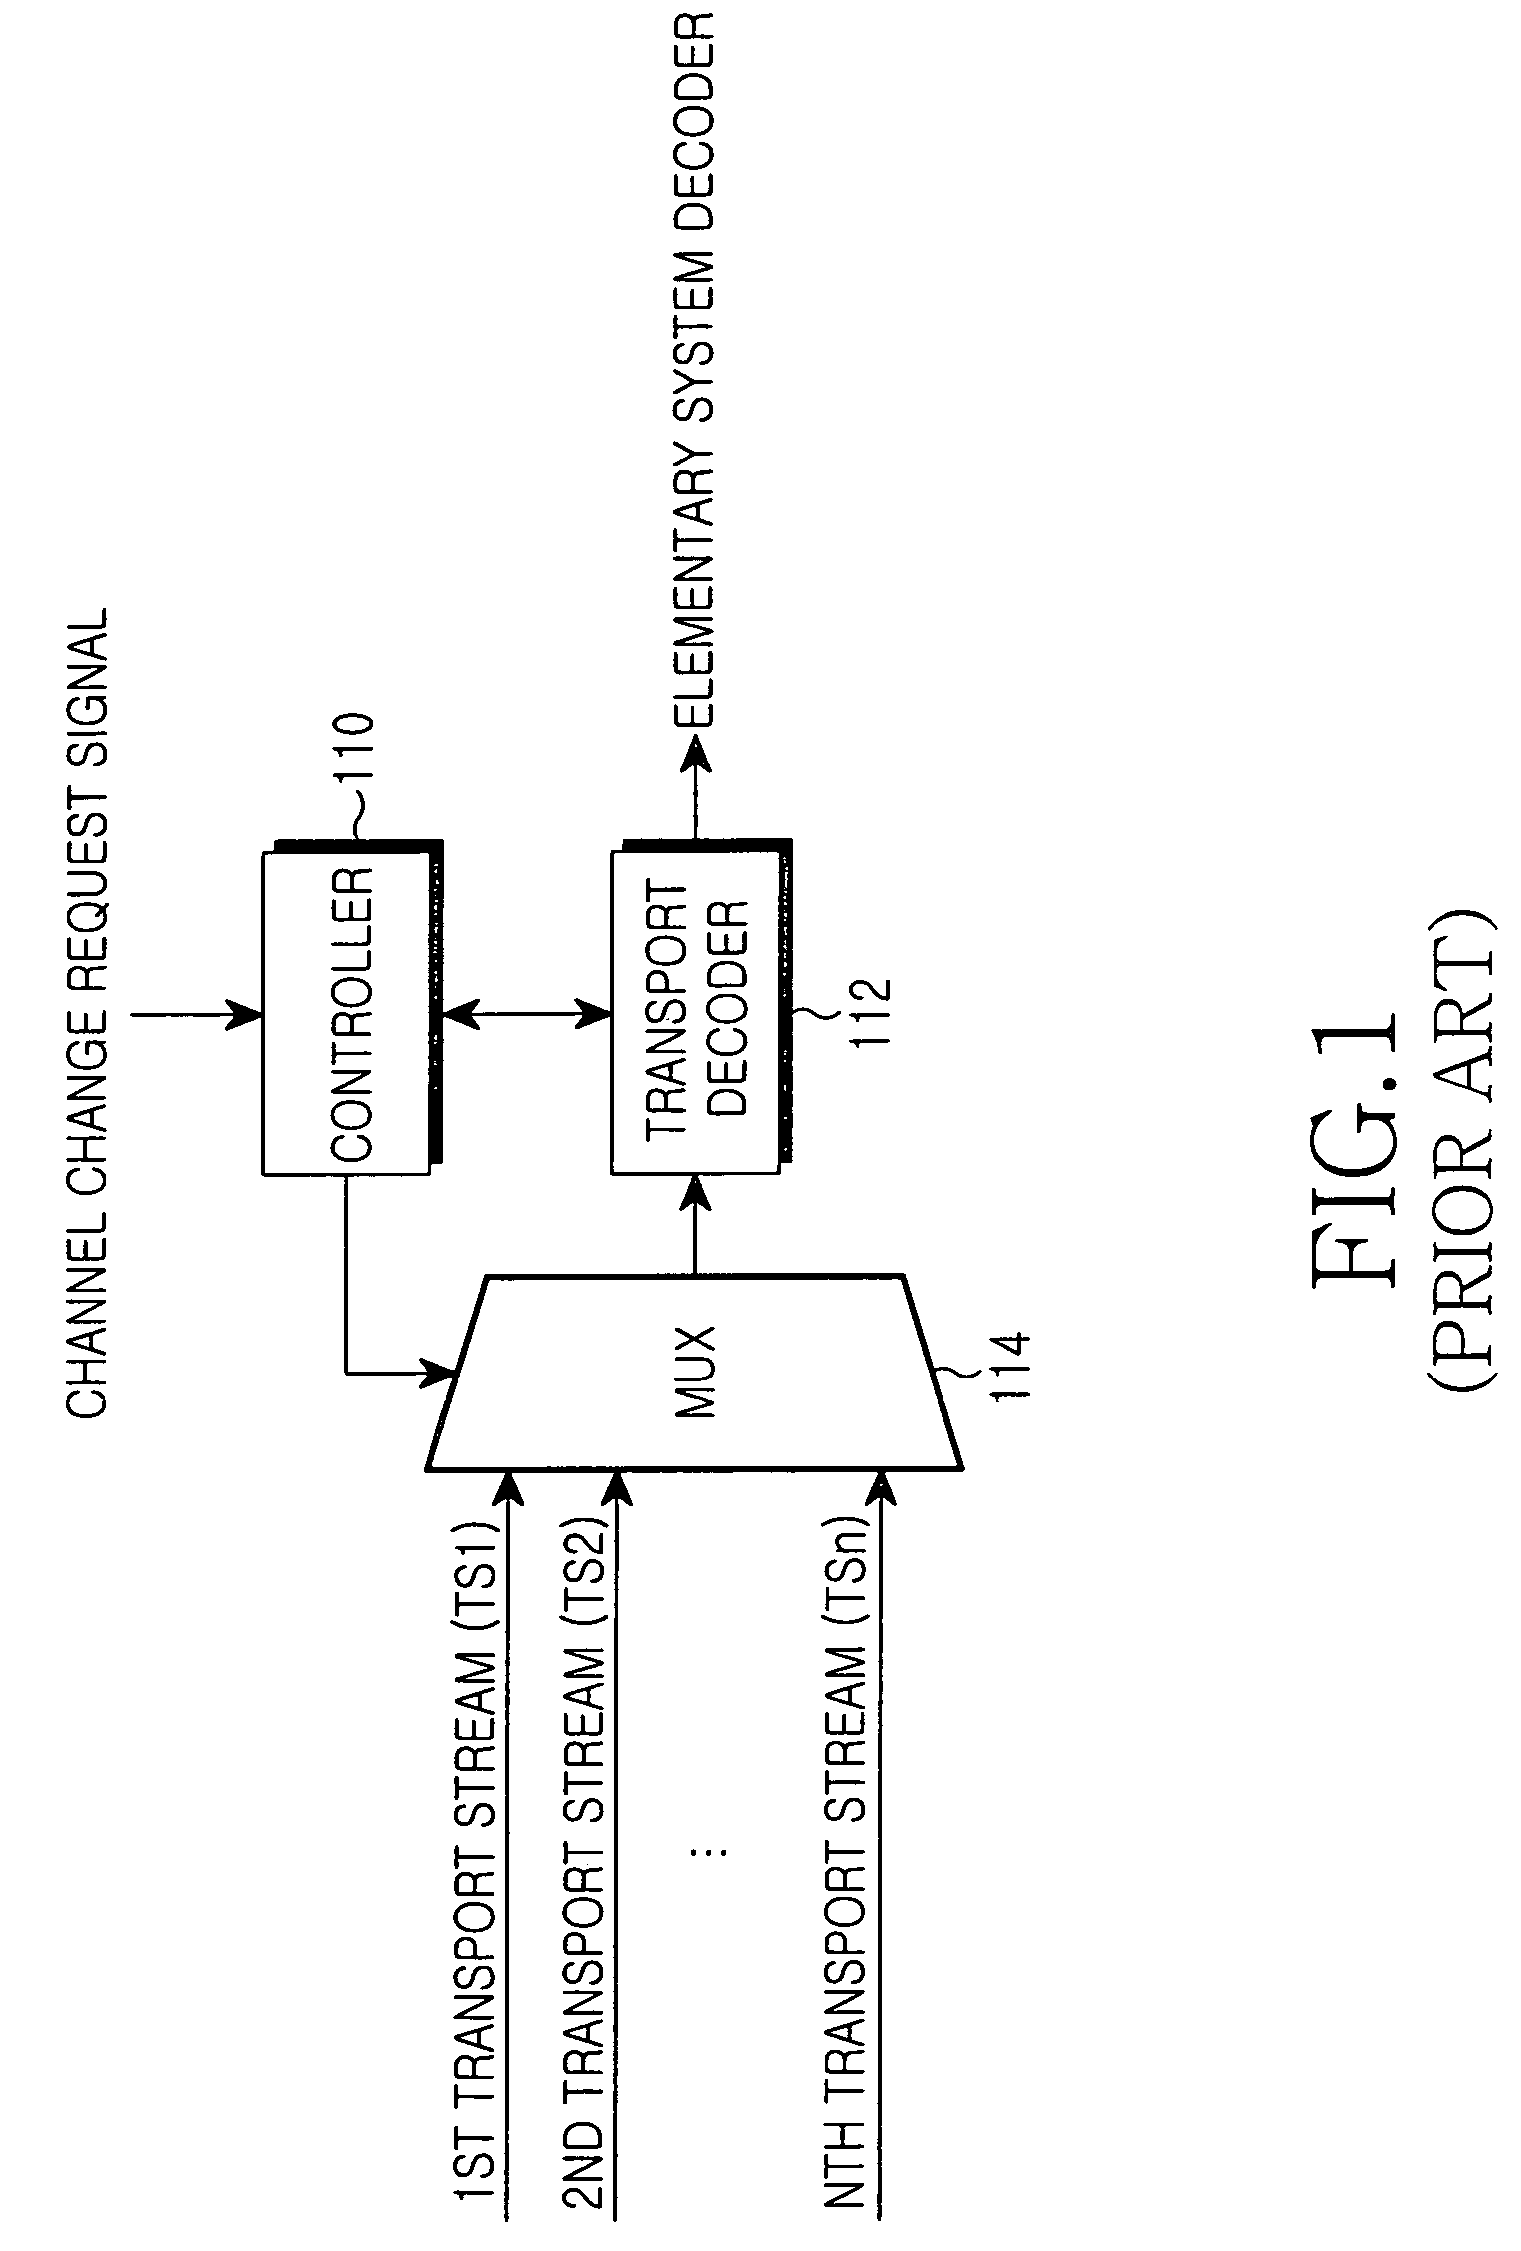 MPEG-2 decoding system and method